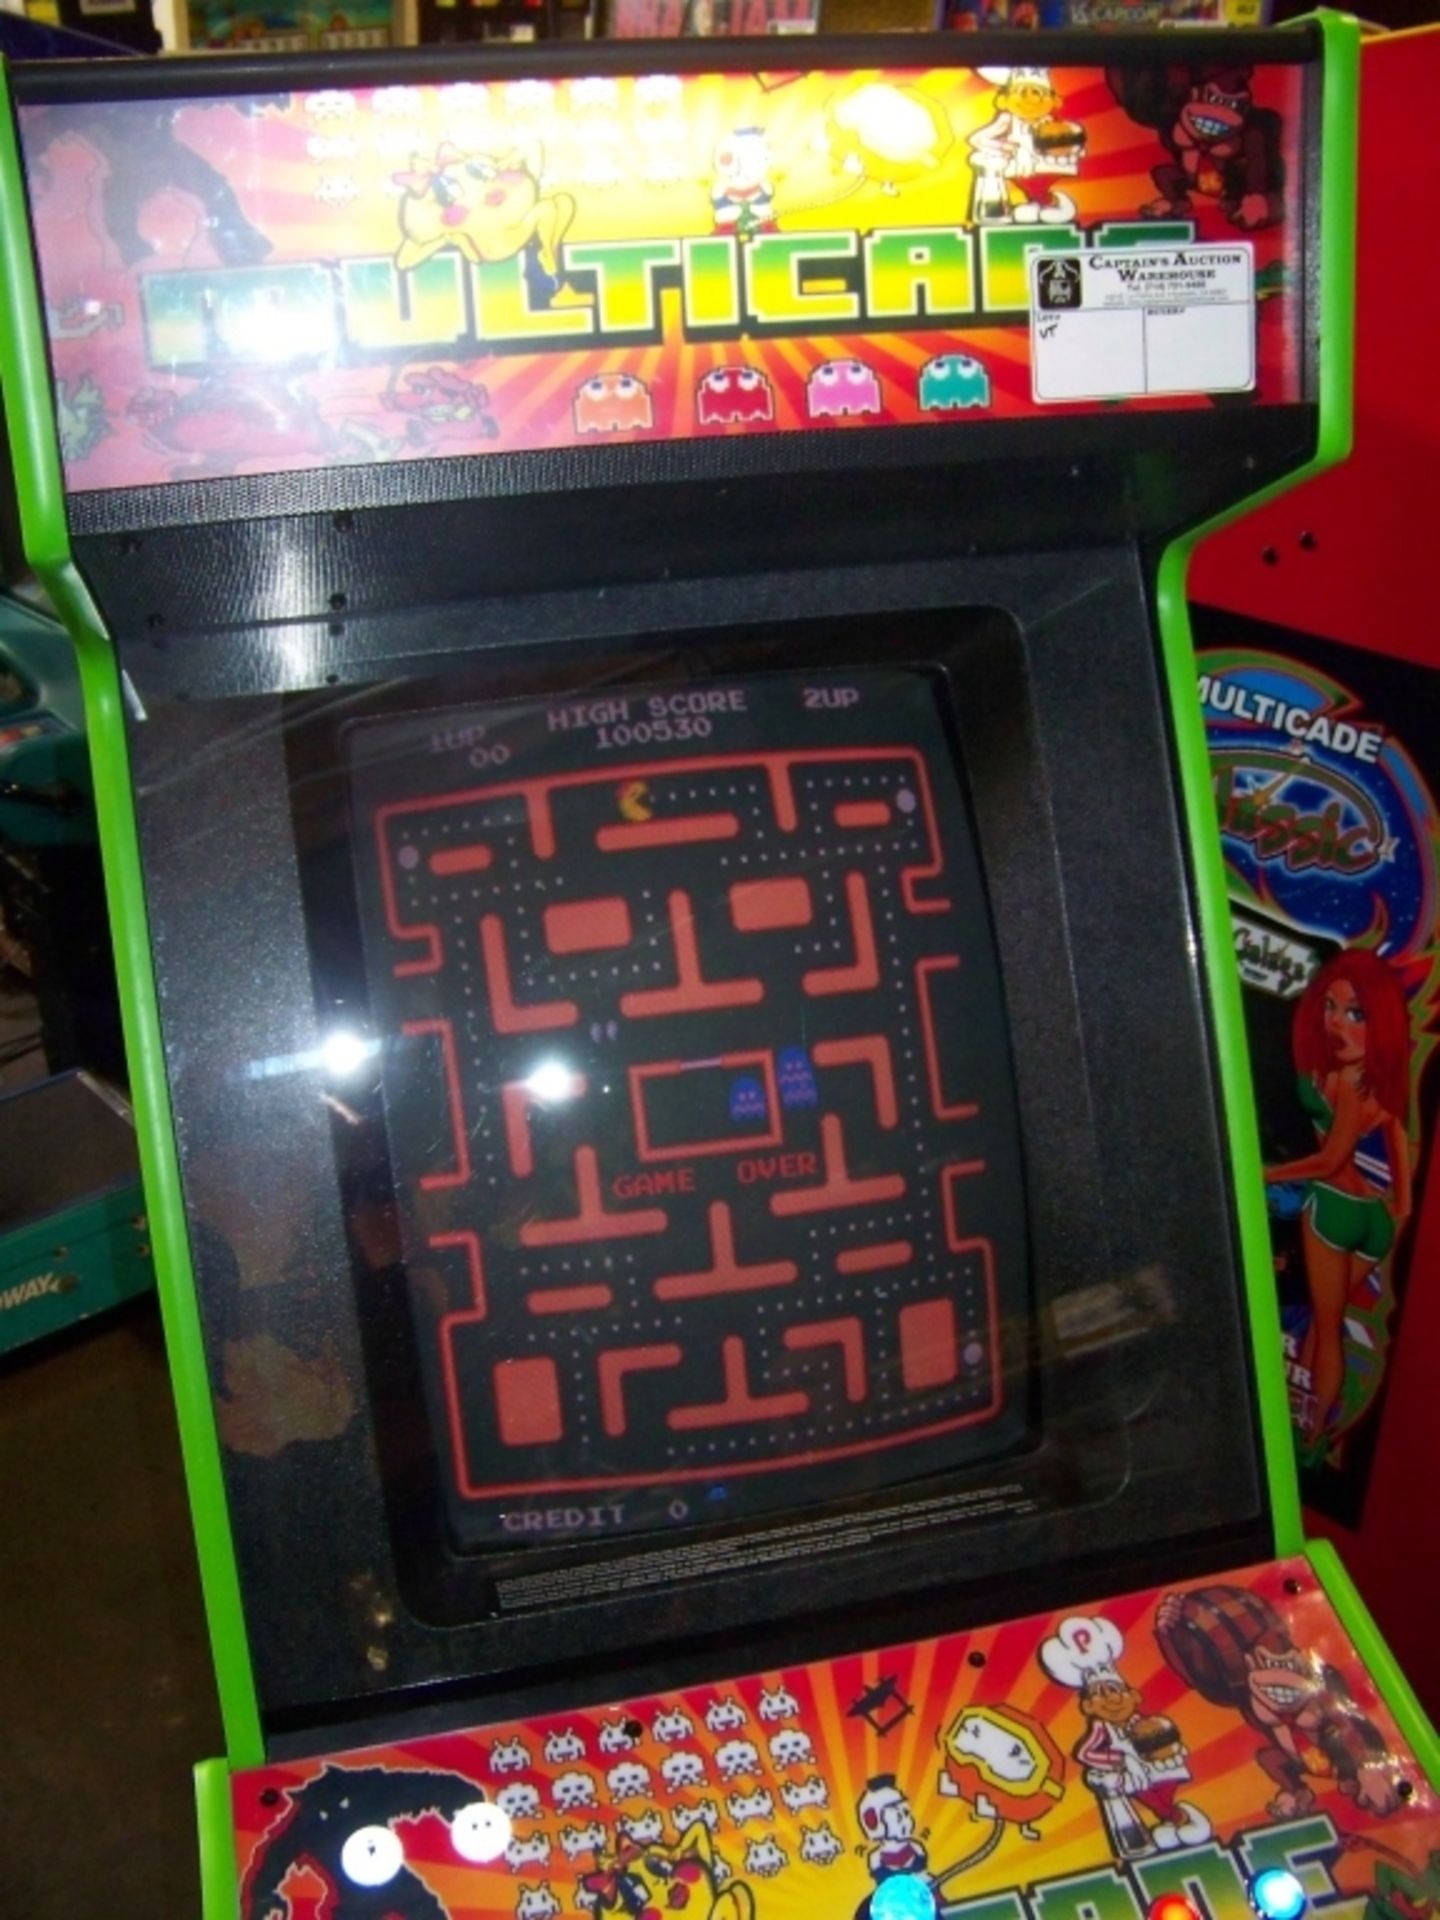 60 IN 1 MULTICADE UPRIGHT ARCADE GAME Item is in used condition. Evidence of wear and commercial - Image 2 of 7